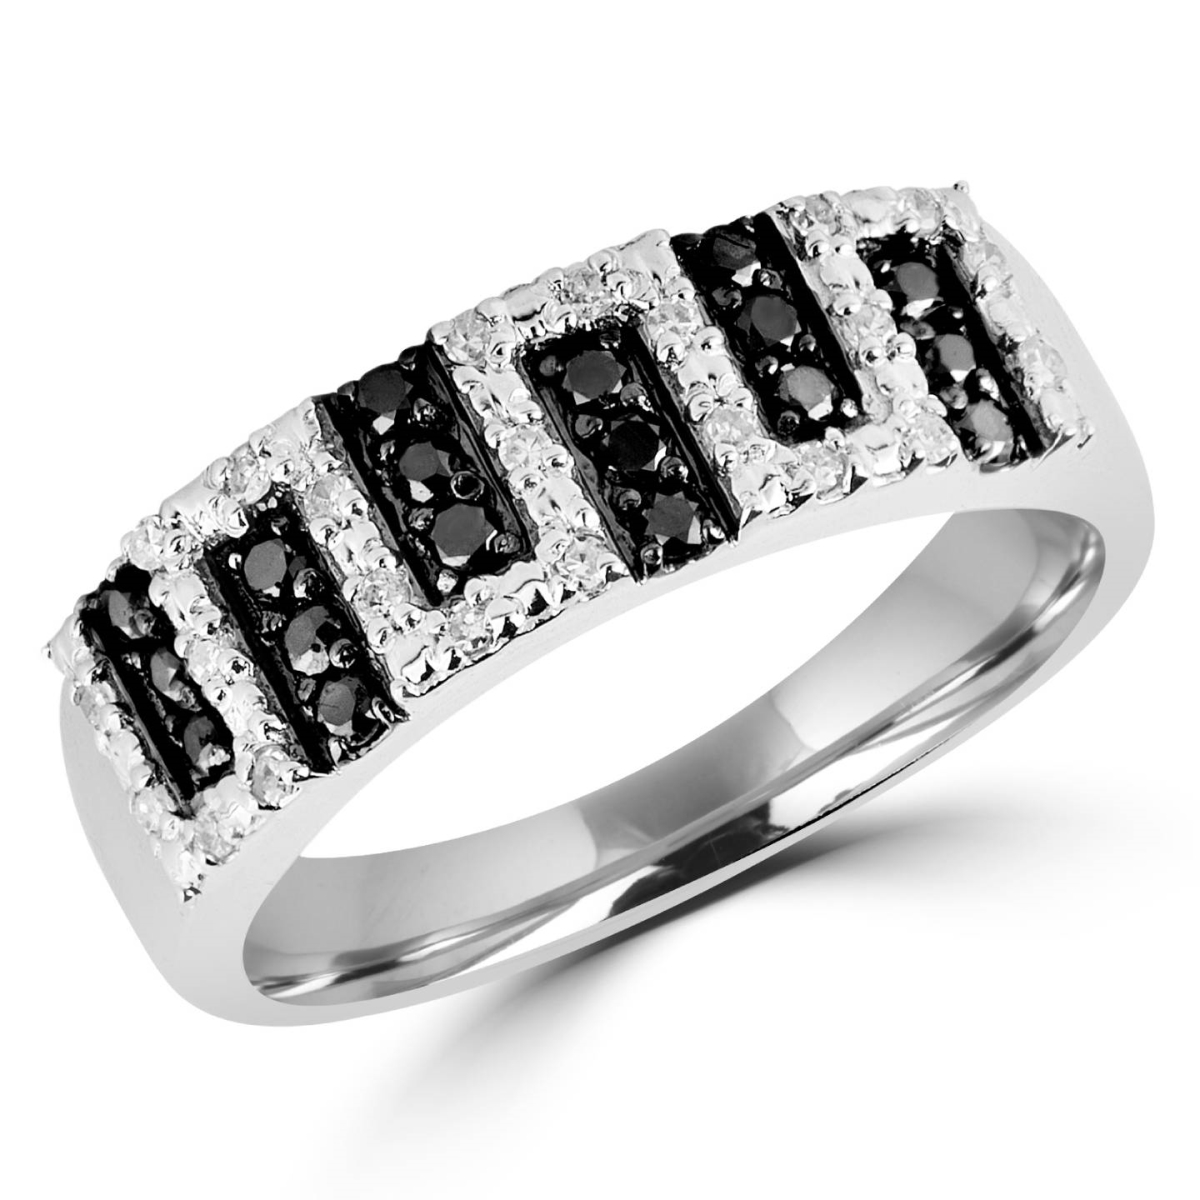 Picture of Majesty Diamonds MDR140087-3.5 0.25 CTW Black & White Diamond Fashion Cocktail Band Ring in 14K White Gold - Size 3.5